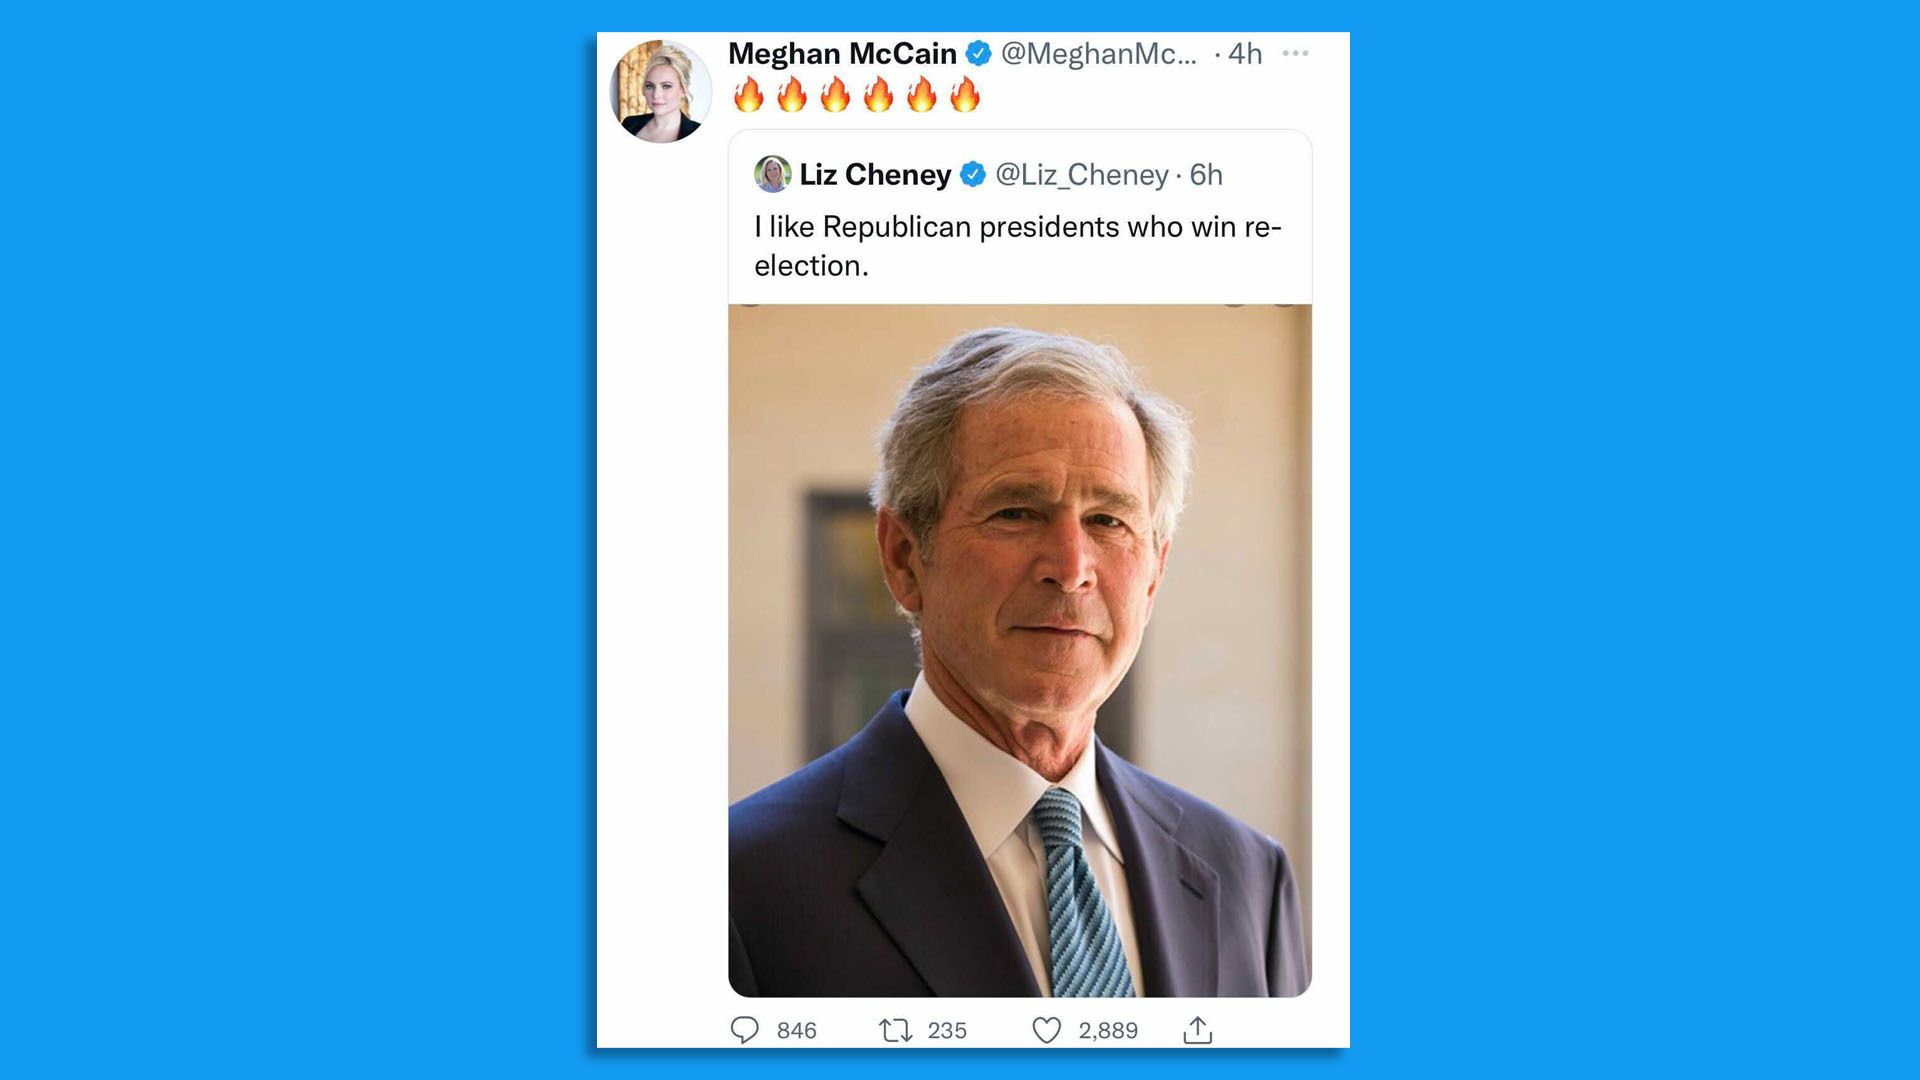 A screenshot shows a tweet from Rep. Liz Cheney saying she likes Republicans who get re-elected president.